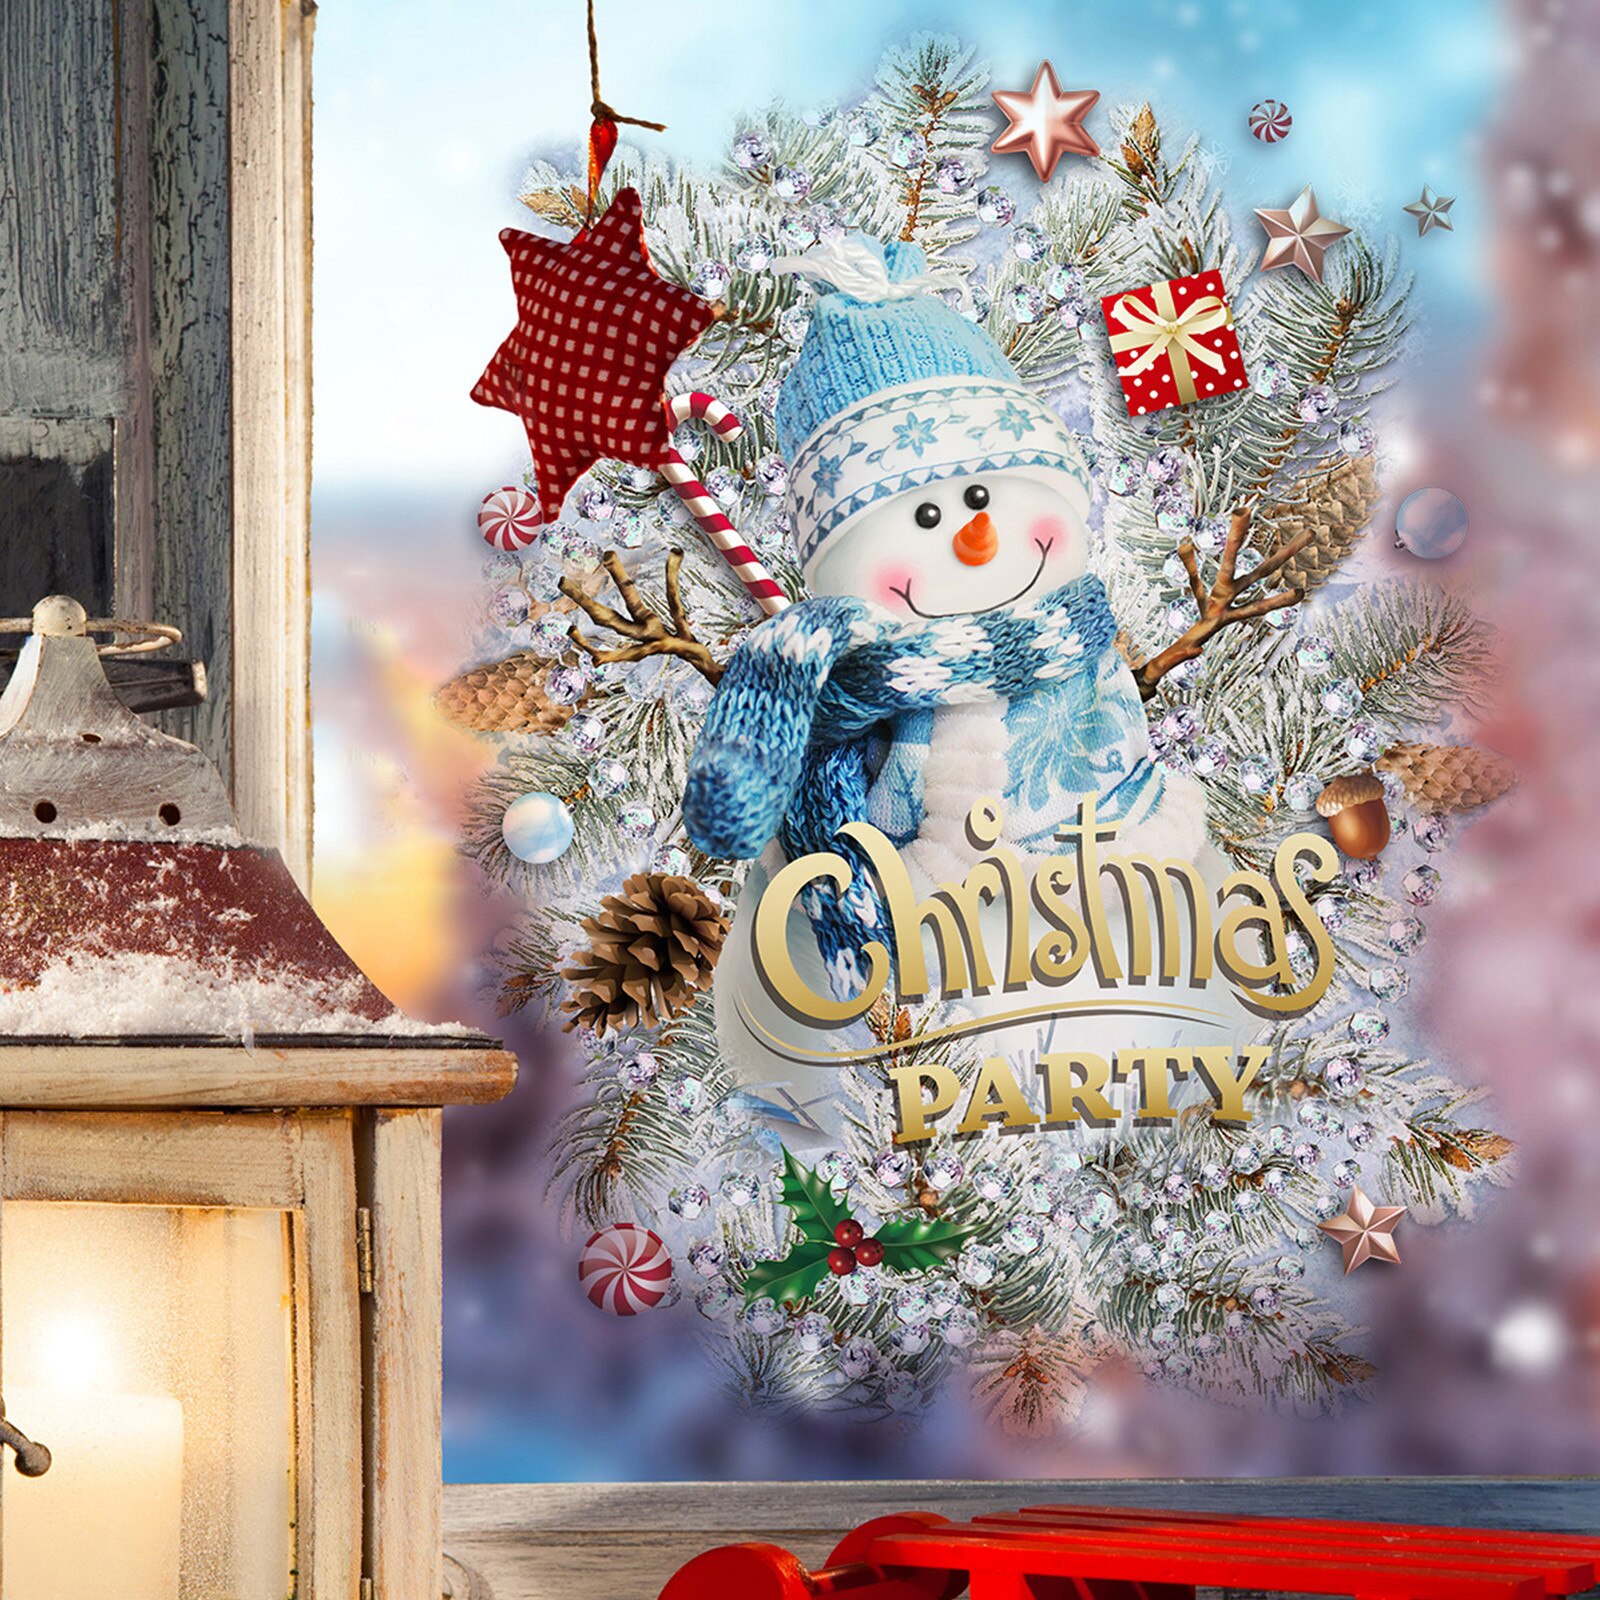 Christmas Wall Stickers Snowman Window Glass Wallpaper Marry Xmas Home Living Room Bedroom Decoration Wall Sticker New Year 2022. Wall Stickers